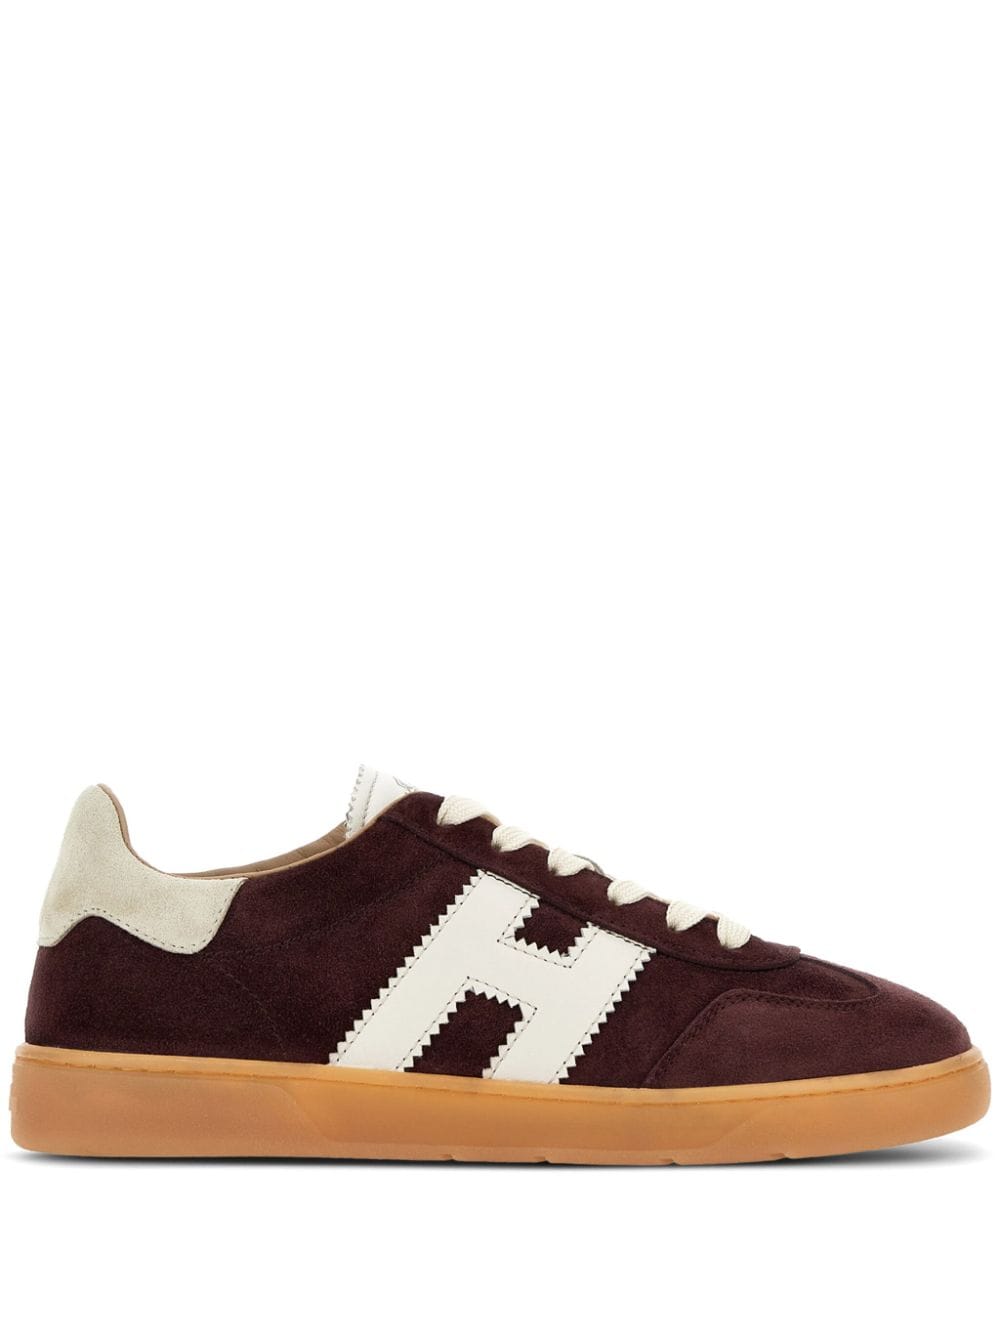 Hogan Cool Lace-up Suede Sneakers In Brown